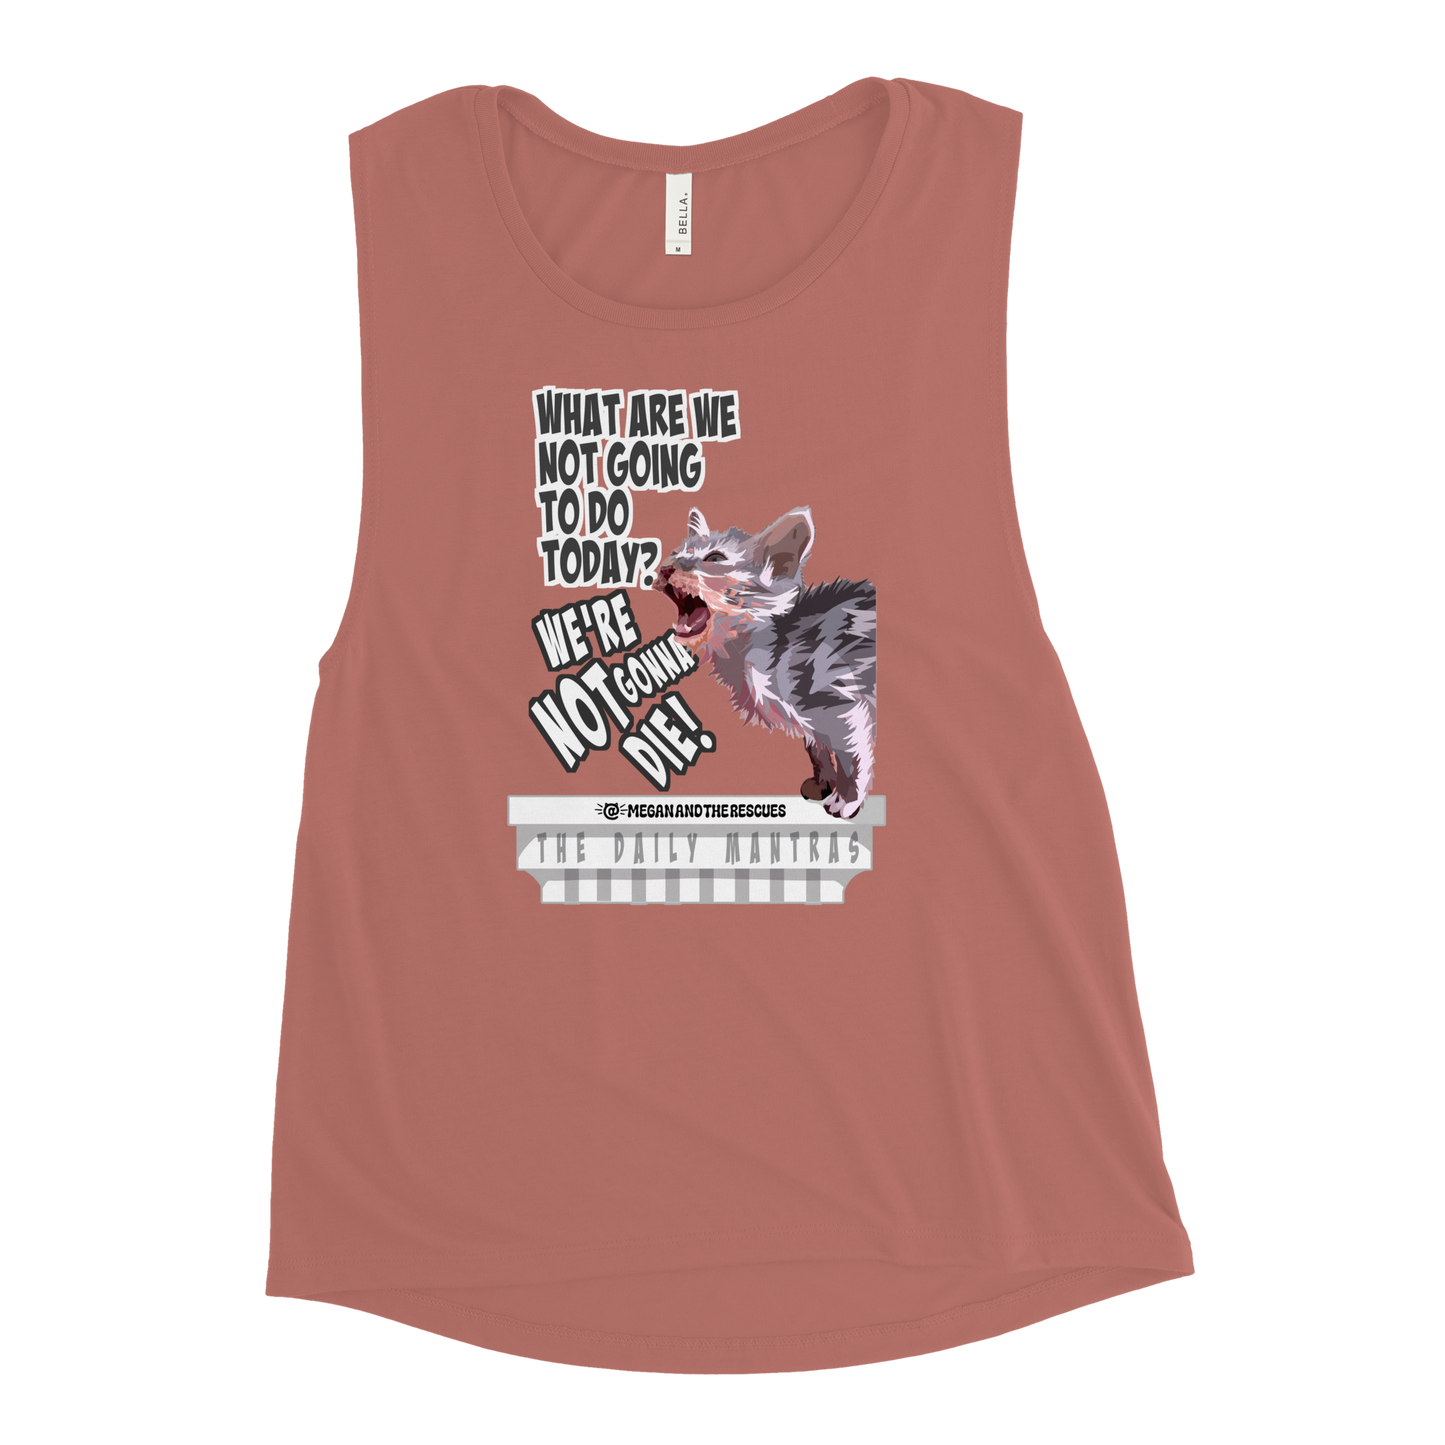 The Daily Mantras (Version 2) - Ladies’ Muscle Tank